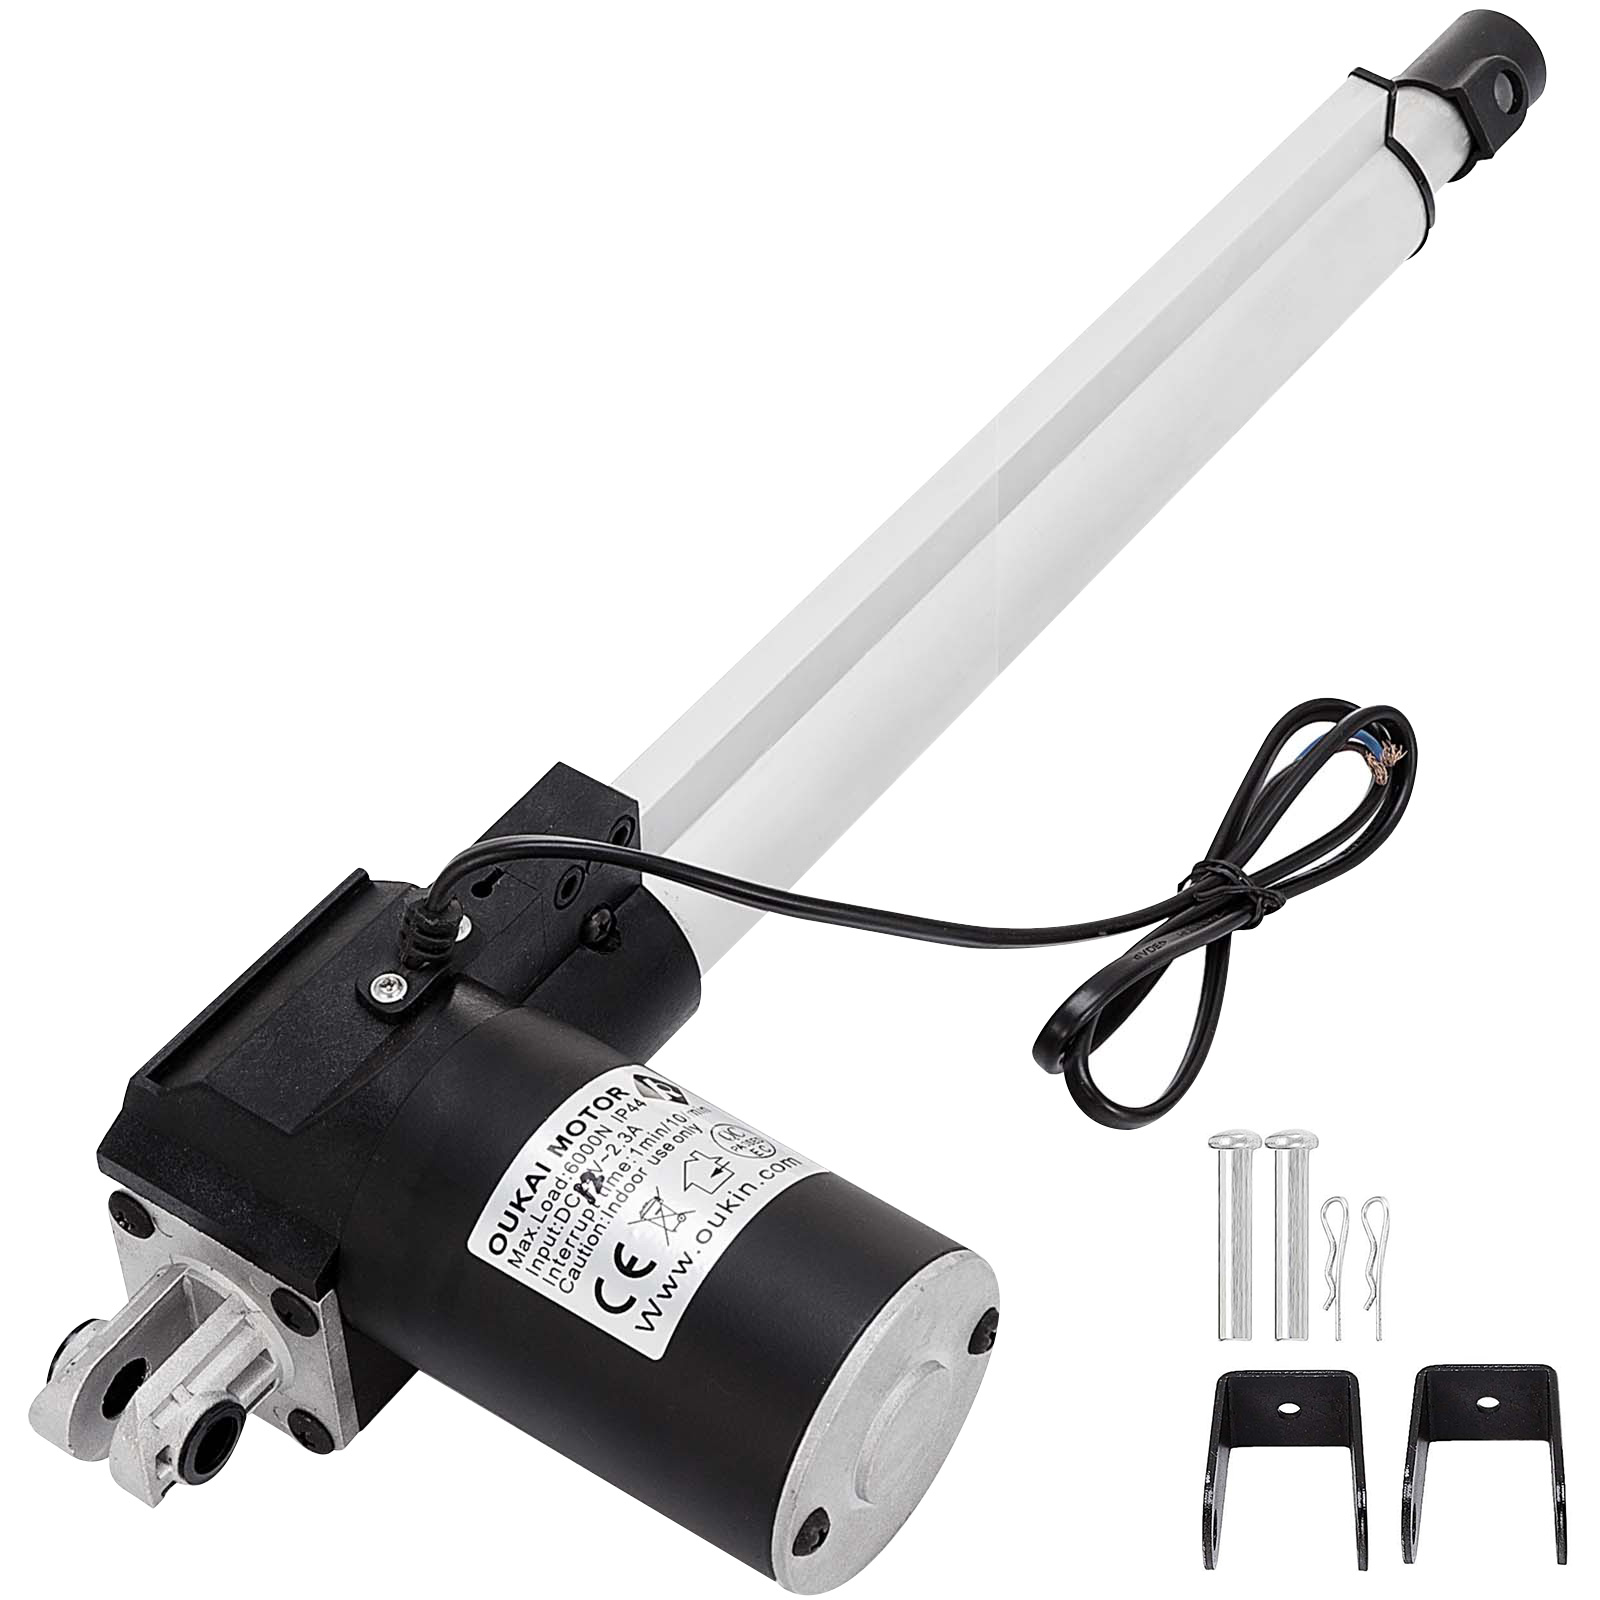 22/28 Inch Stroke Linear Actuator 6000N/1320lbs Pound Max Lift 12V Volt DC Motor 